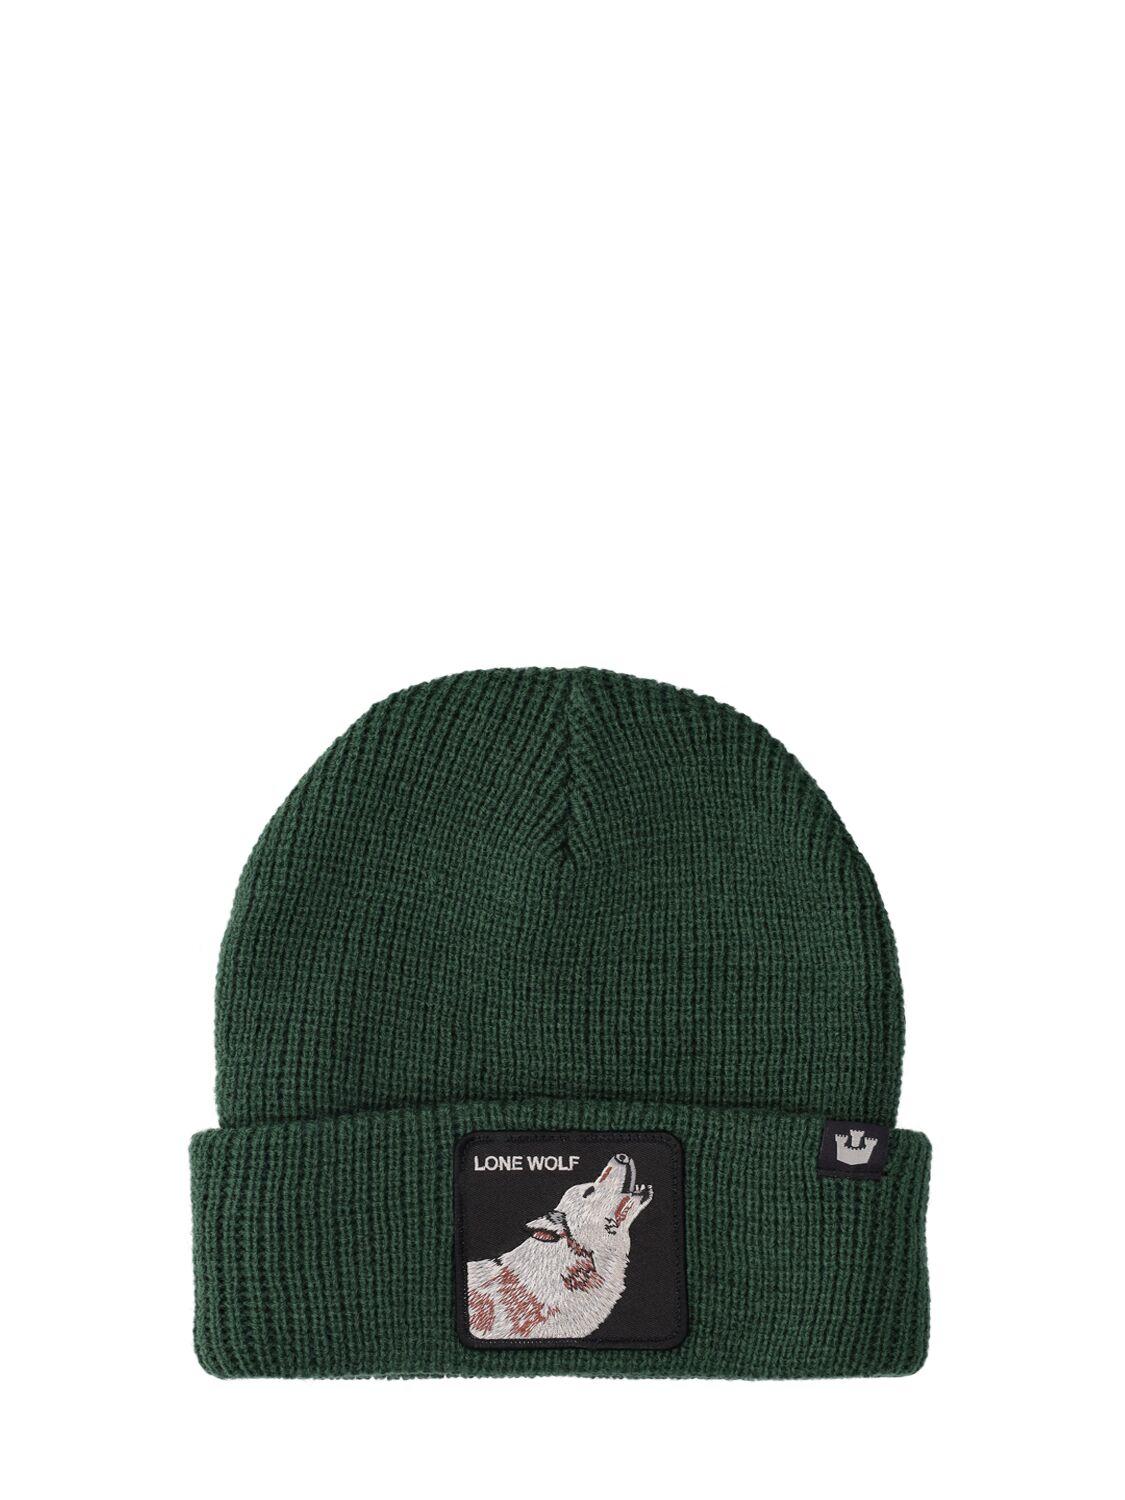 Goorin Bros Singled Out Knit Beanie In Green